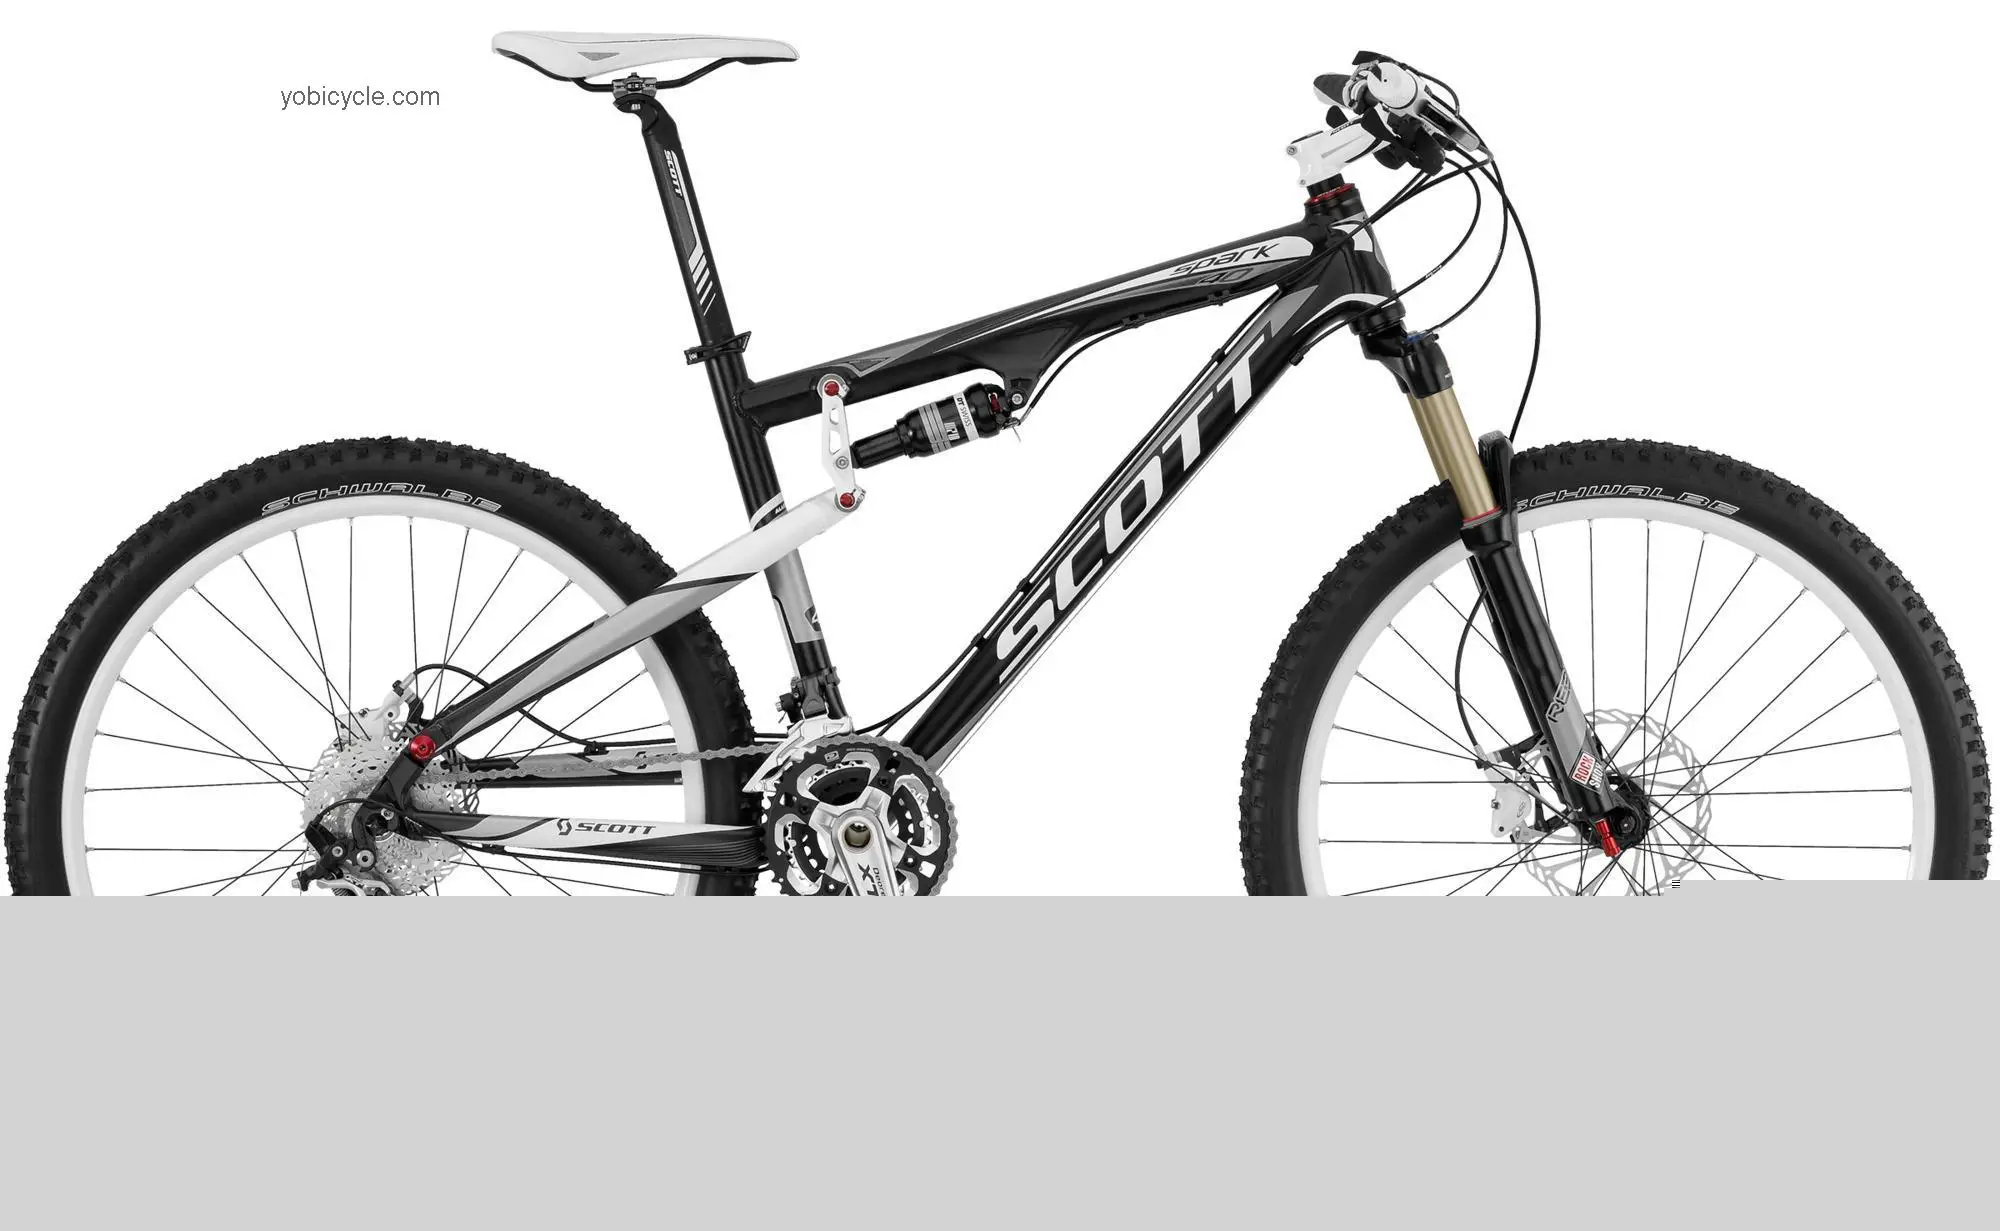 Scott Spark 40 competitors and comparison tool online specs and performance